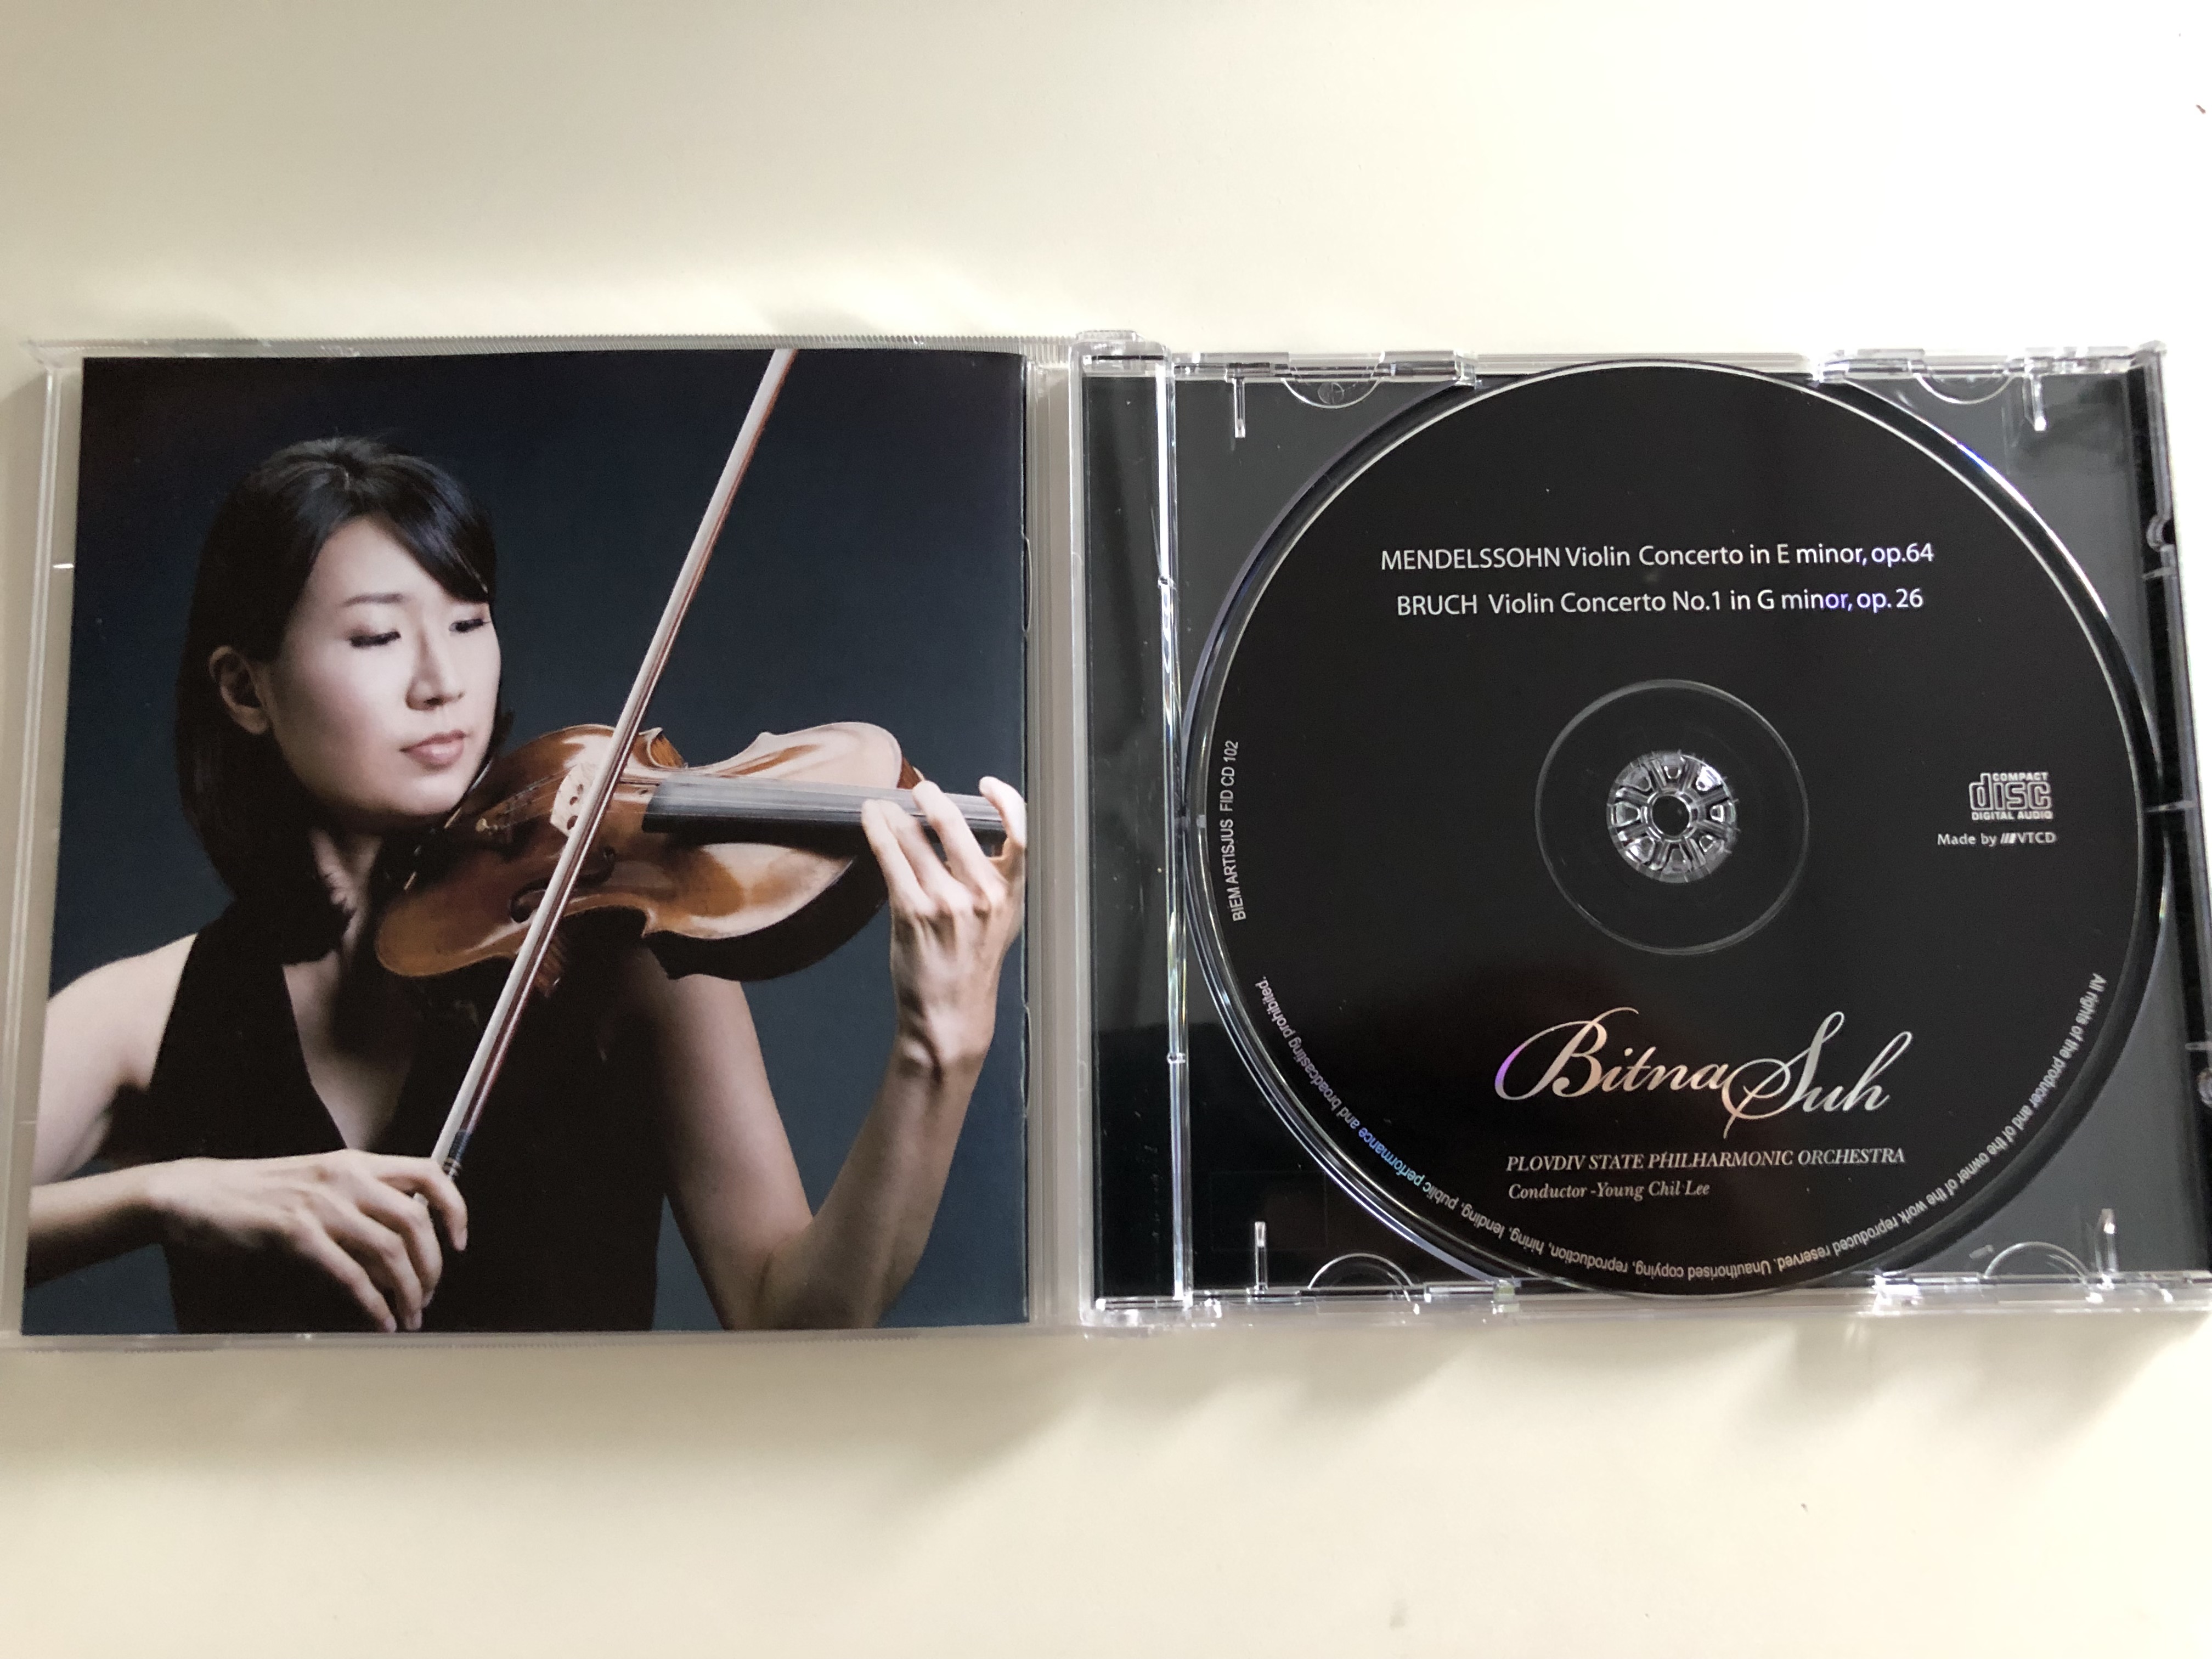 bitna-suh-mendelssohn-bruch-violin-concertos-plovdiv-state-philharmonic-orchestra-conducted-by-young-chil-lee-audio-cd-2009-fid-cd-102-7-.jpg